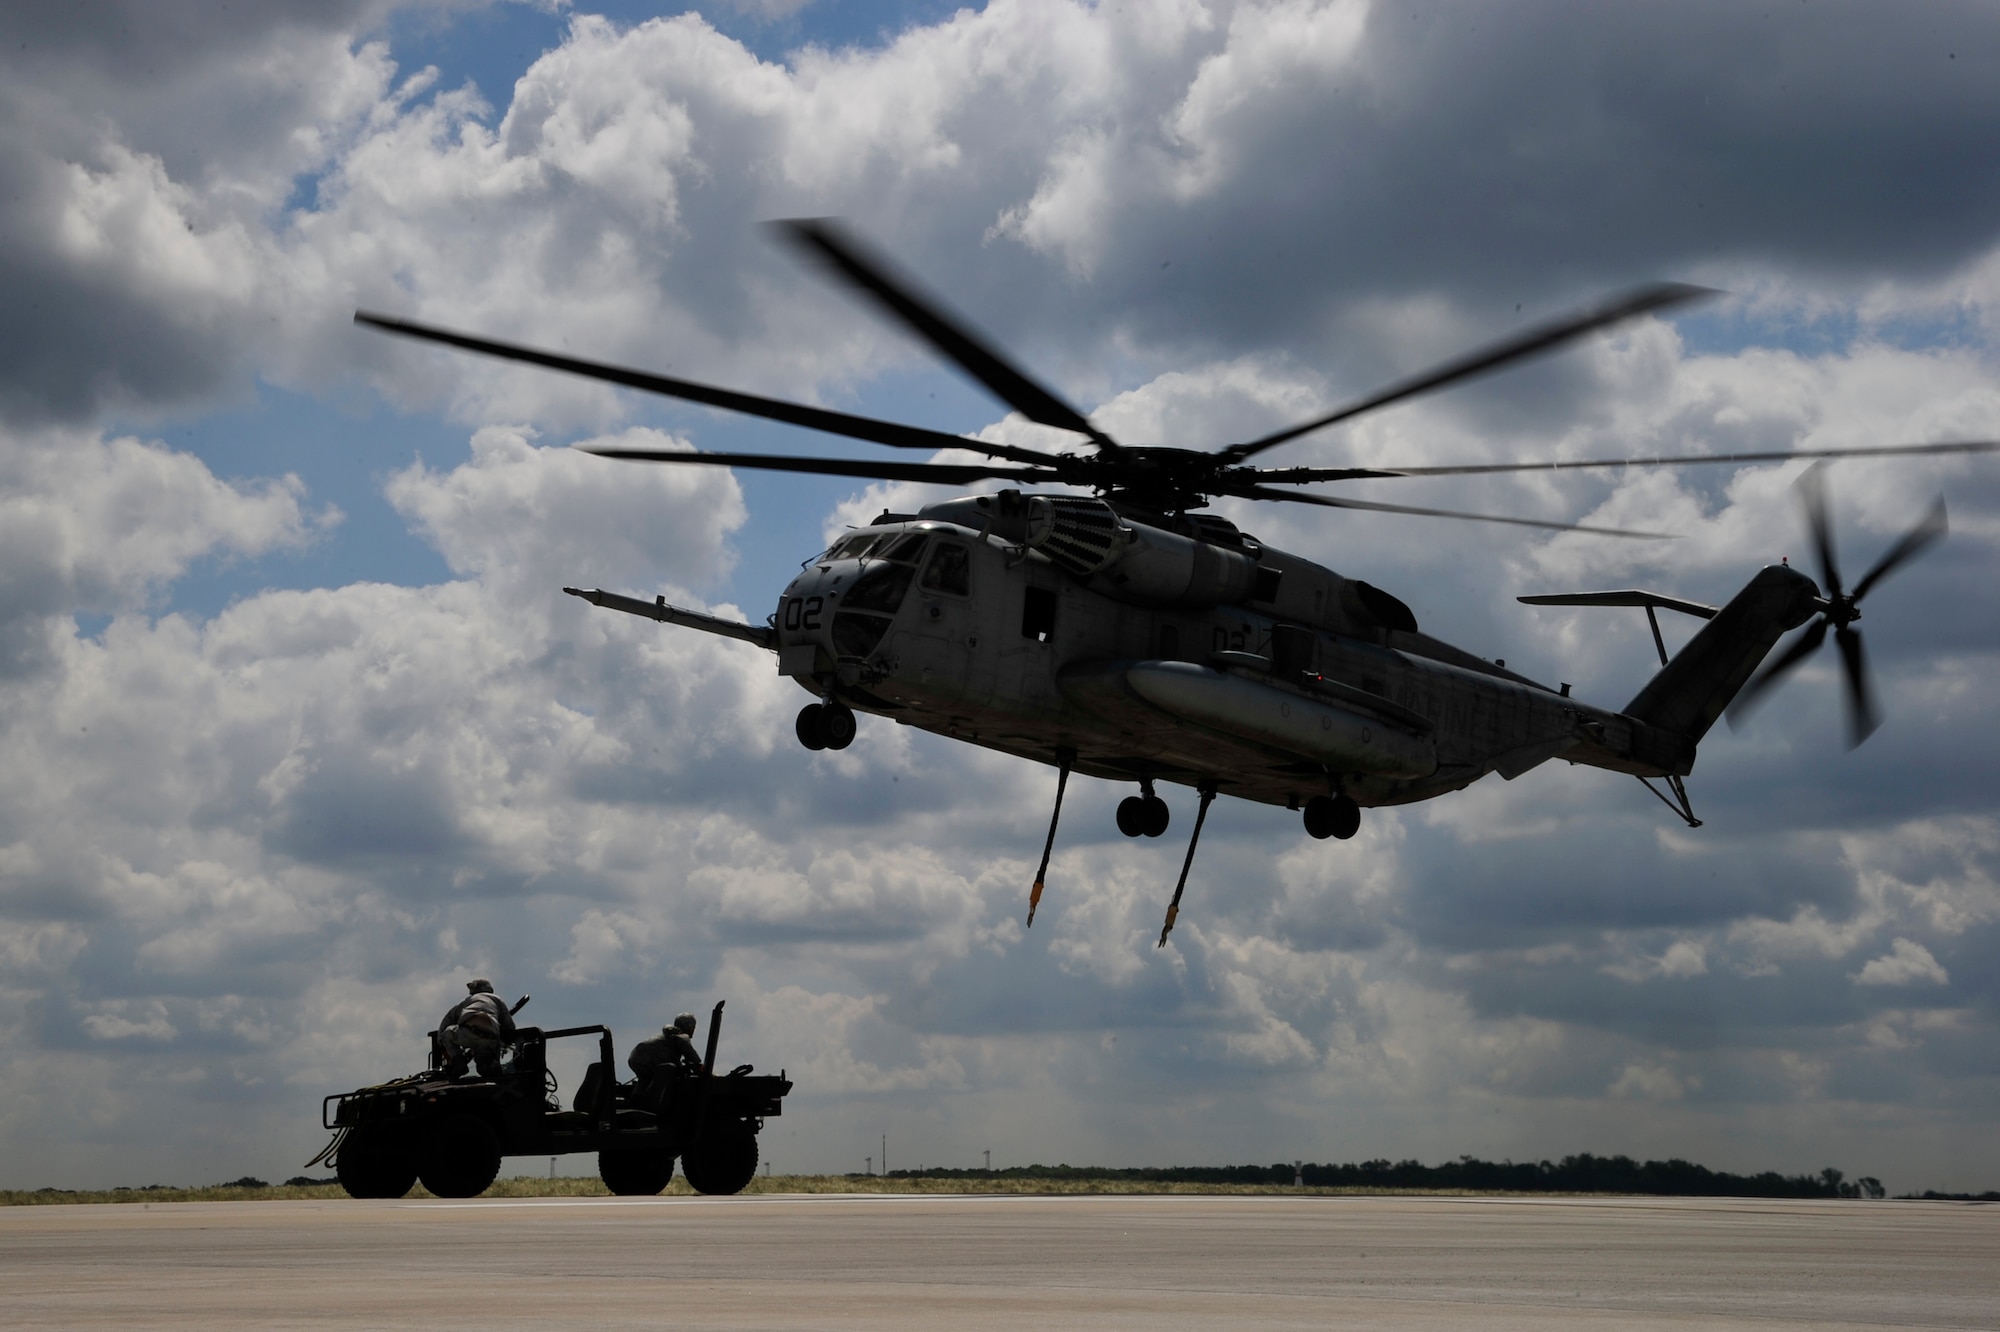 A U.S. Marine Corps CH-53E Super Stallion from Marine Heavy Helicopter Squadron 772 conducts slingload operations with Airmen from the 621st Contingency Response Wing at Joint Base McGuire-Dix-Lakehurst, N.J., May 10. Both units were preparing for a Marine airpower demonstration at the 2012 JB MDL Open House and & Air Show, scheduled for May 12 and 13.  (U.S. Air Force photo by Tech. Sgt. Parker Gyokeres)